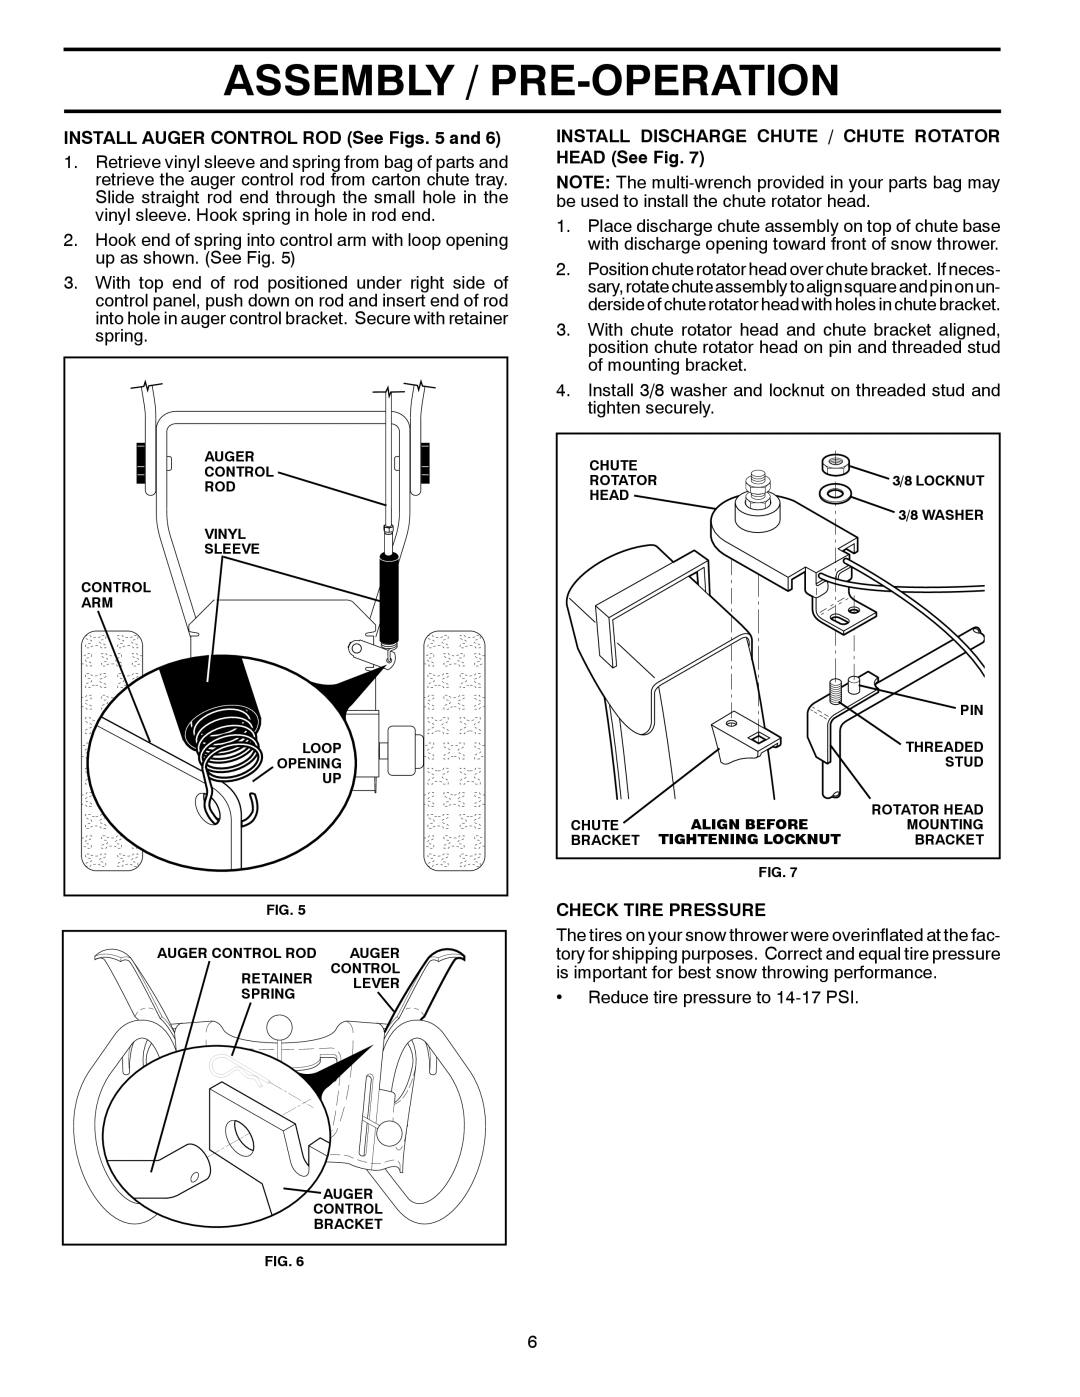 Poulan 430352, 96192003301 Assembly / Pre-Operation, INSTALL AUGER CONTROL ROD See Figs. 5 and, Check Tire Pressure 